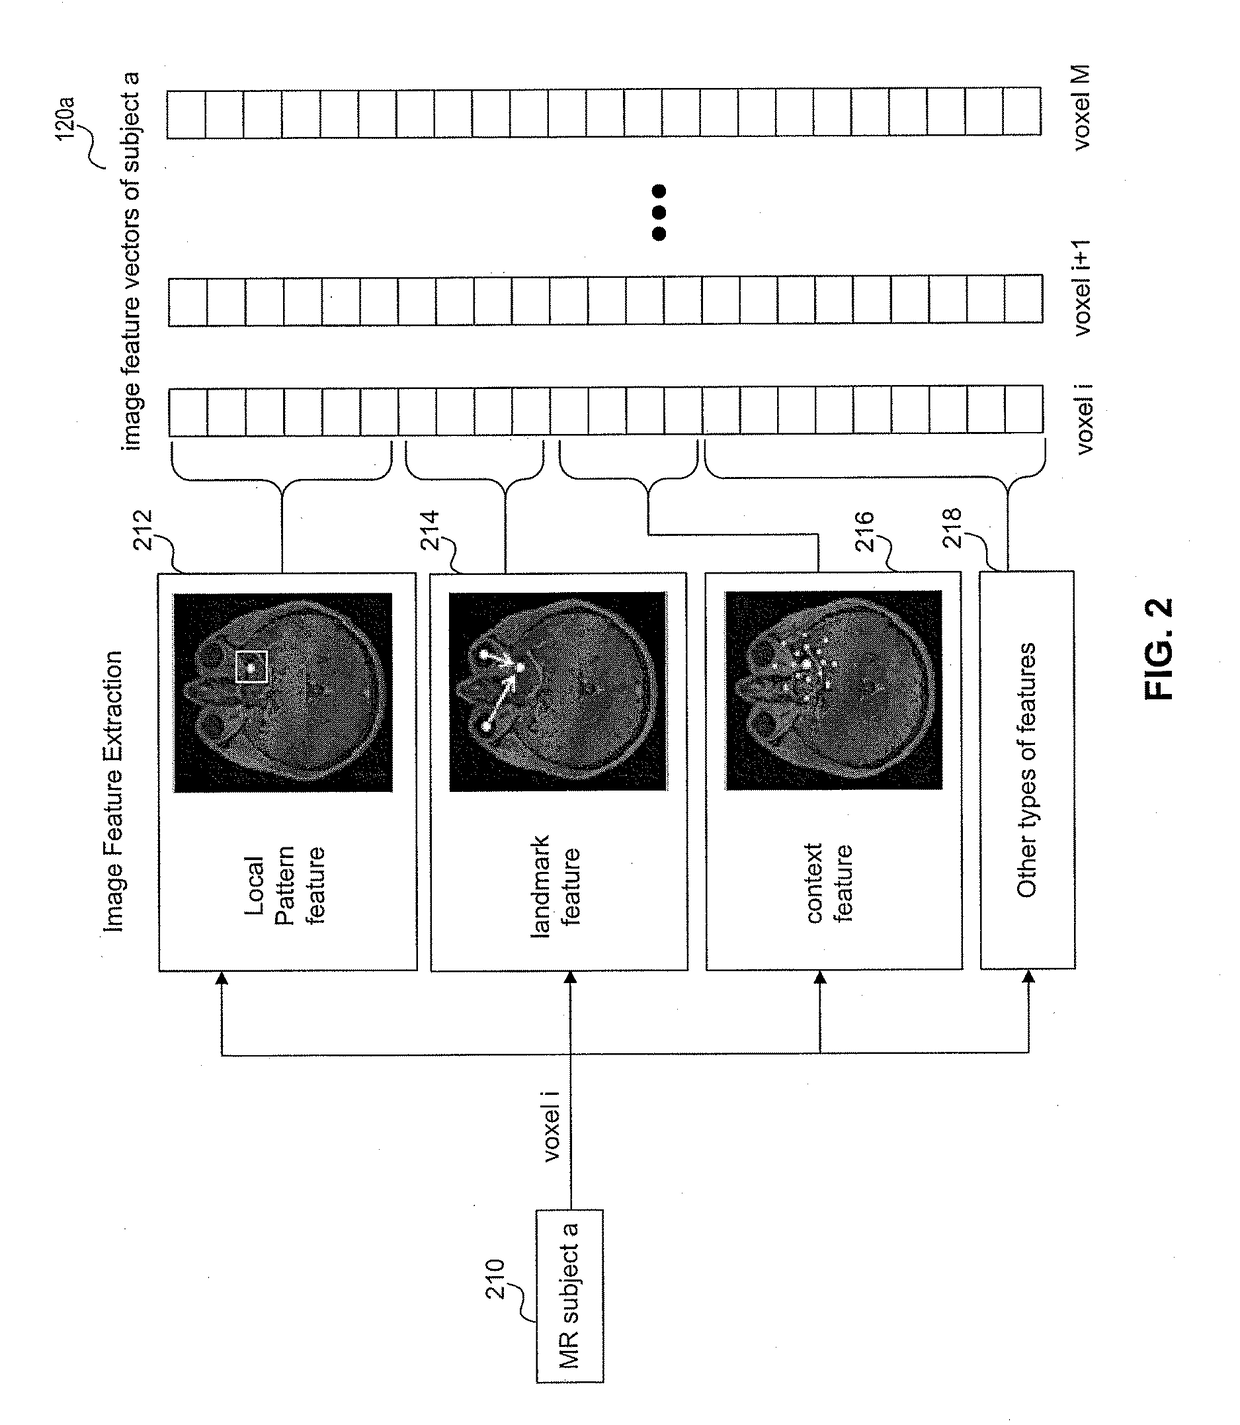 Pseudo-ct generation from mr data using a feature regression model